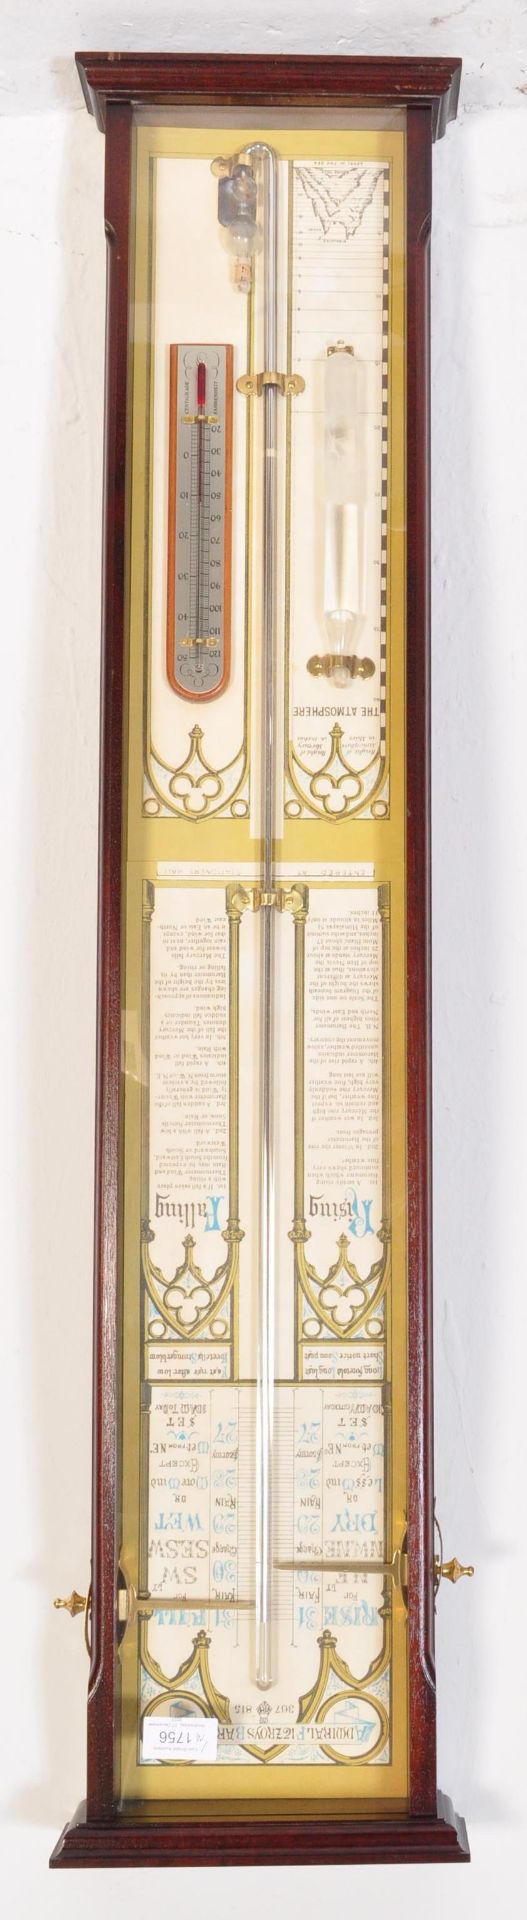 MAHOGANY CASED ADMIRAL FITZROY WALL BAROMETER - Image 2 of 6